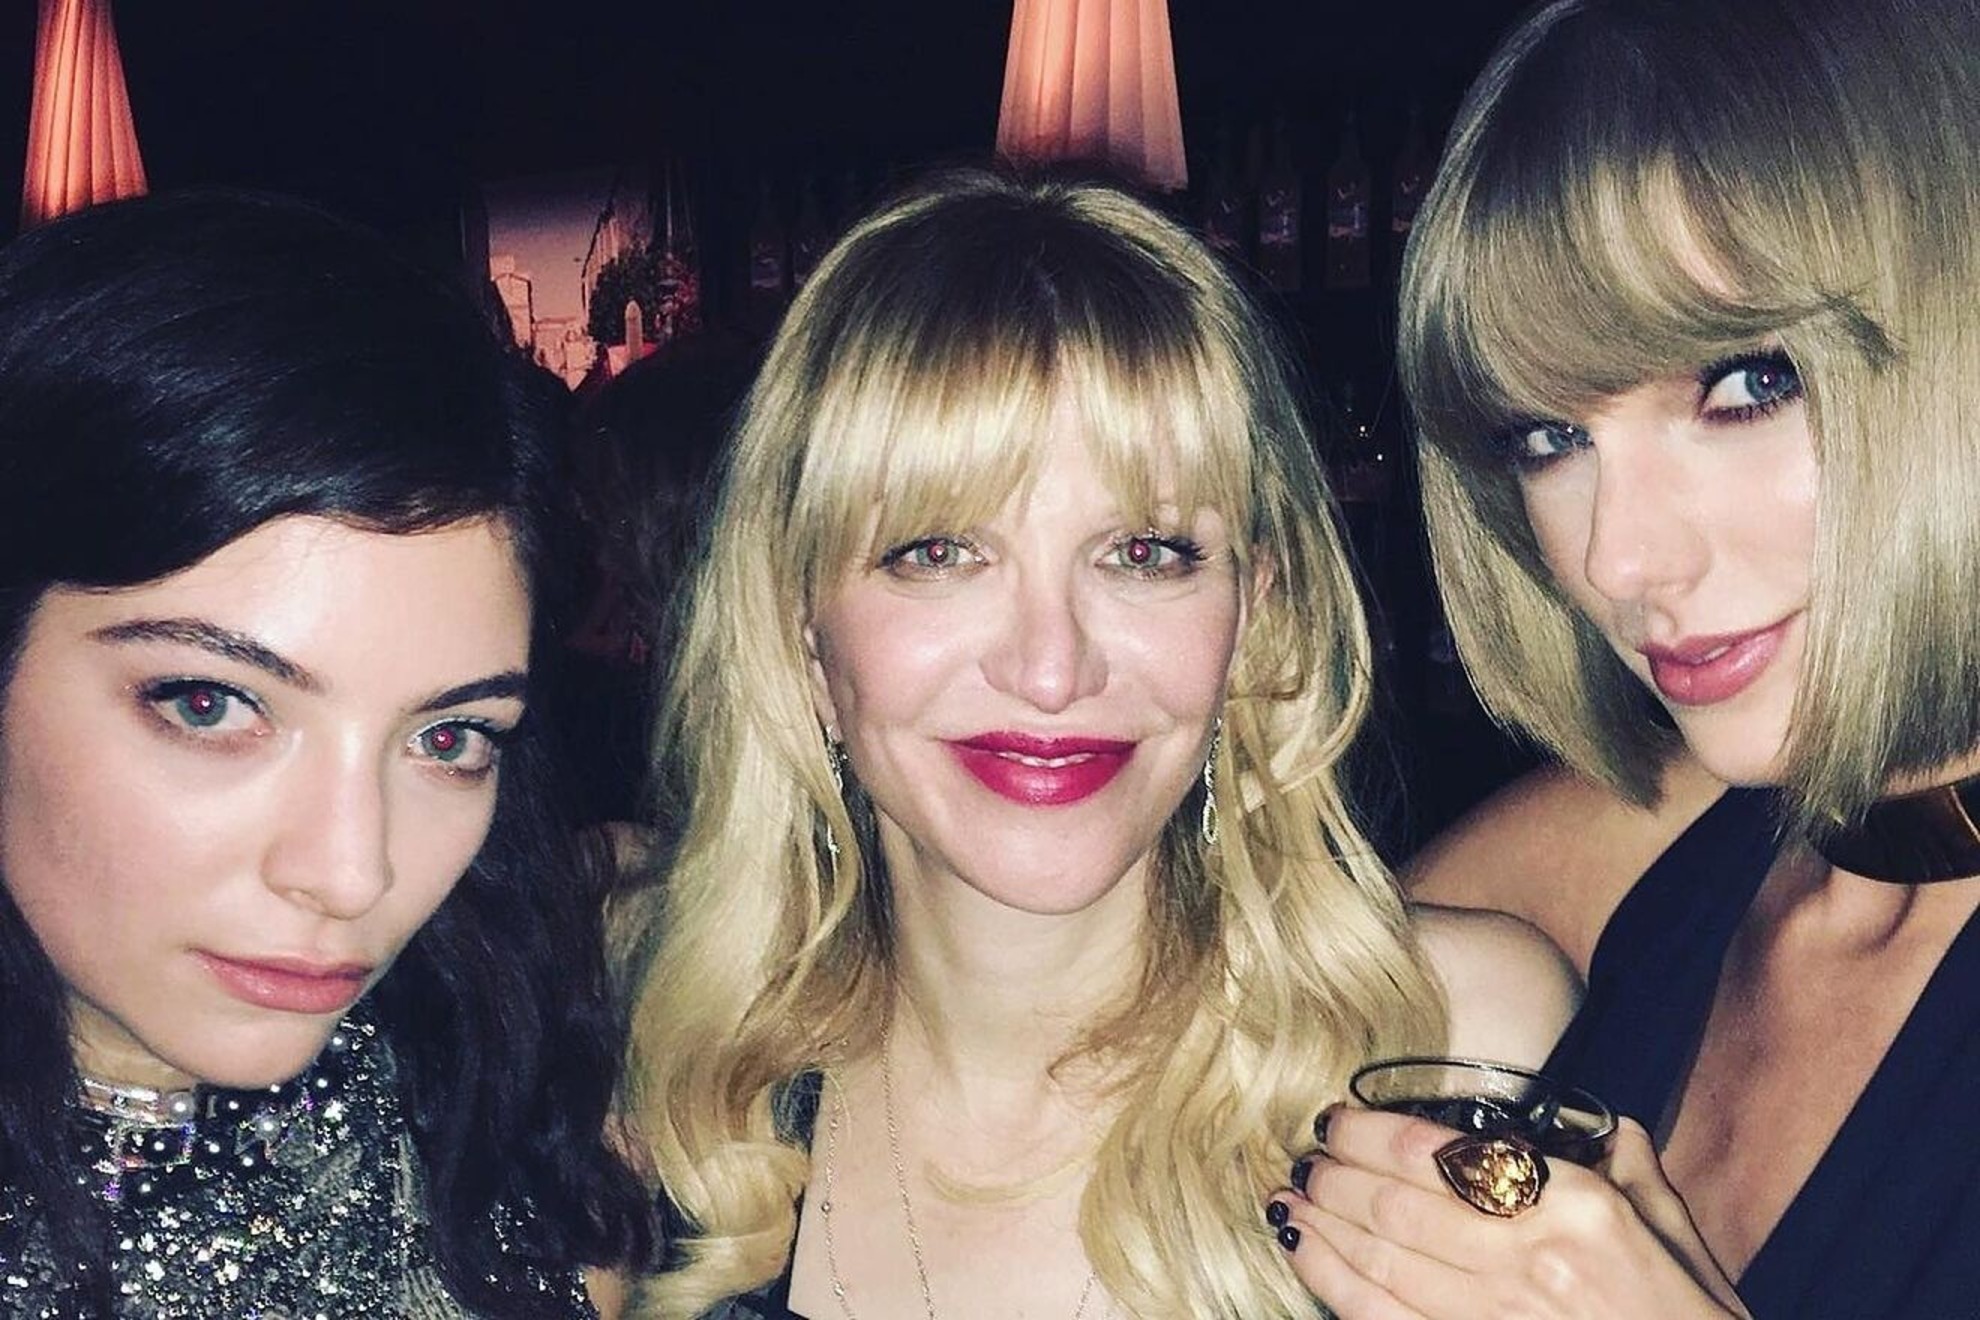 Lorde, Courtney Love and Taylor Swift